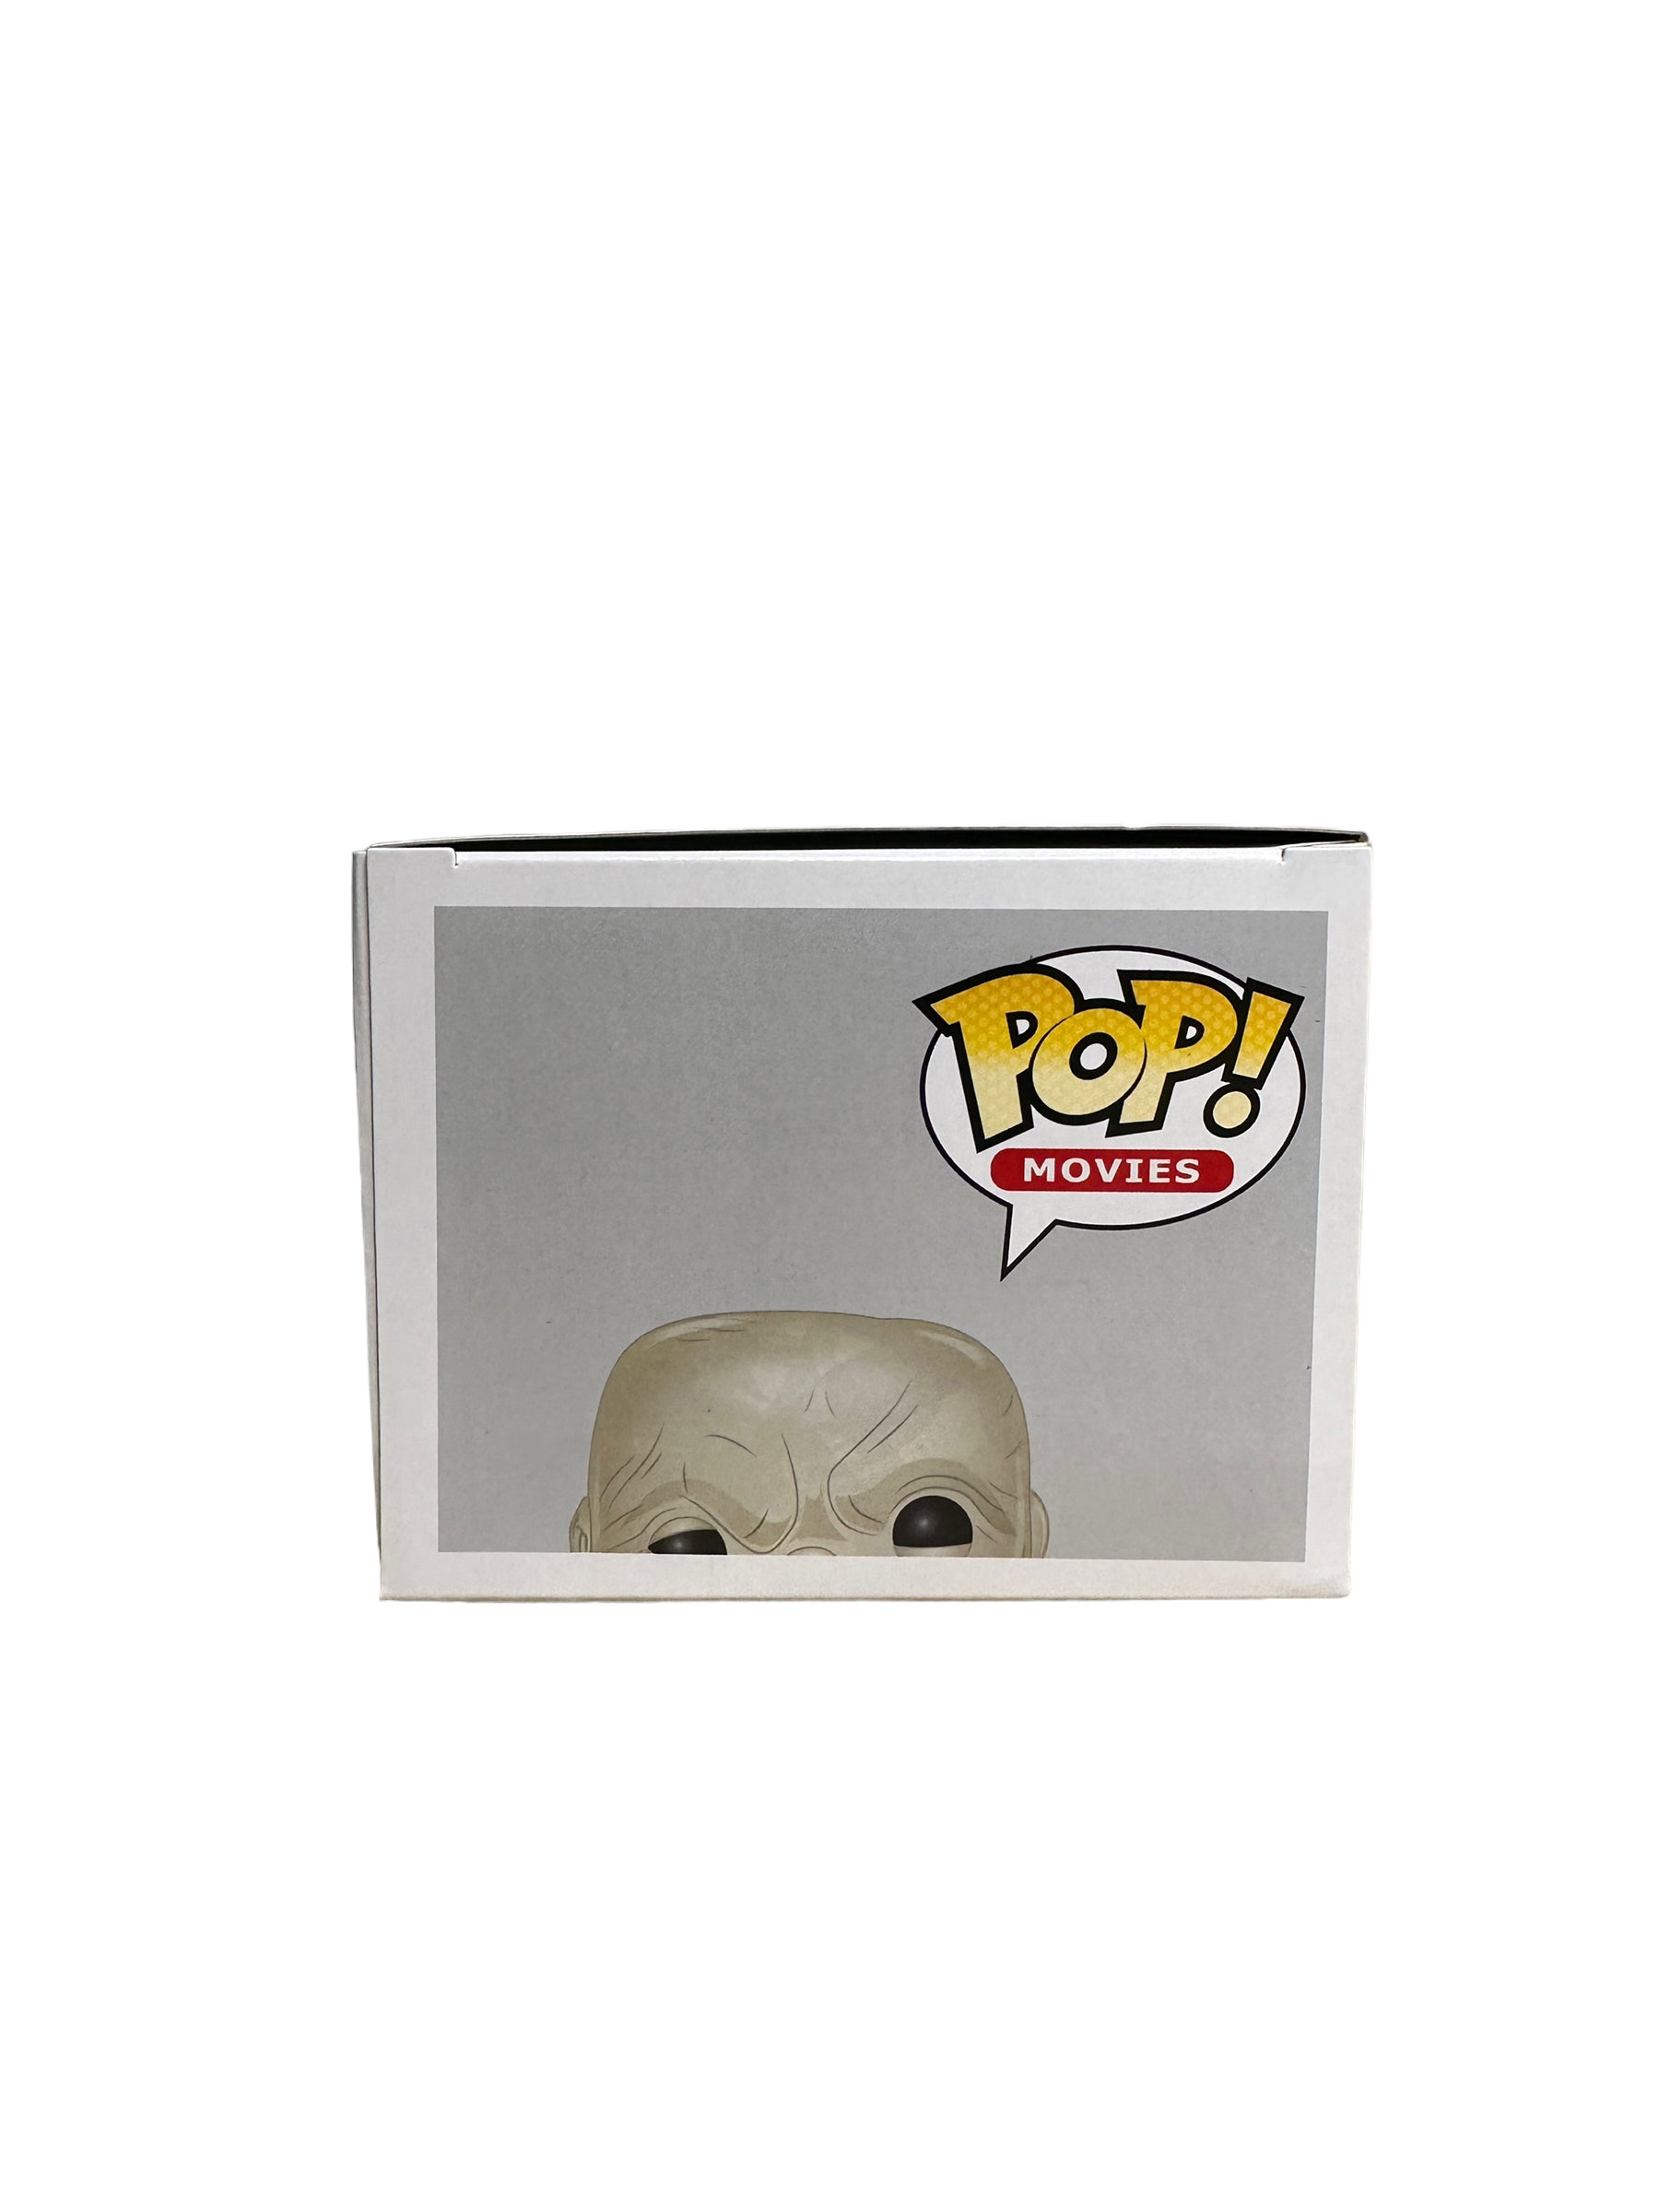 Jason Voorhees #202 (Unmasked) Funko Pop! - Friday the 13th - SDCC 2015 Shared Exclusive - Condition 9/10